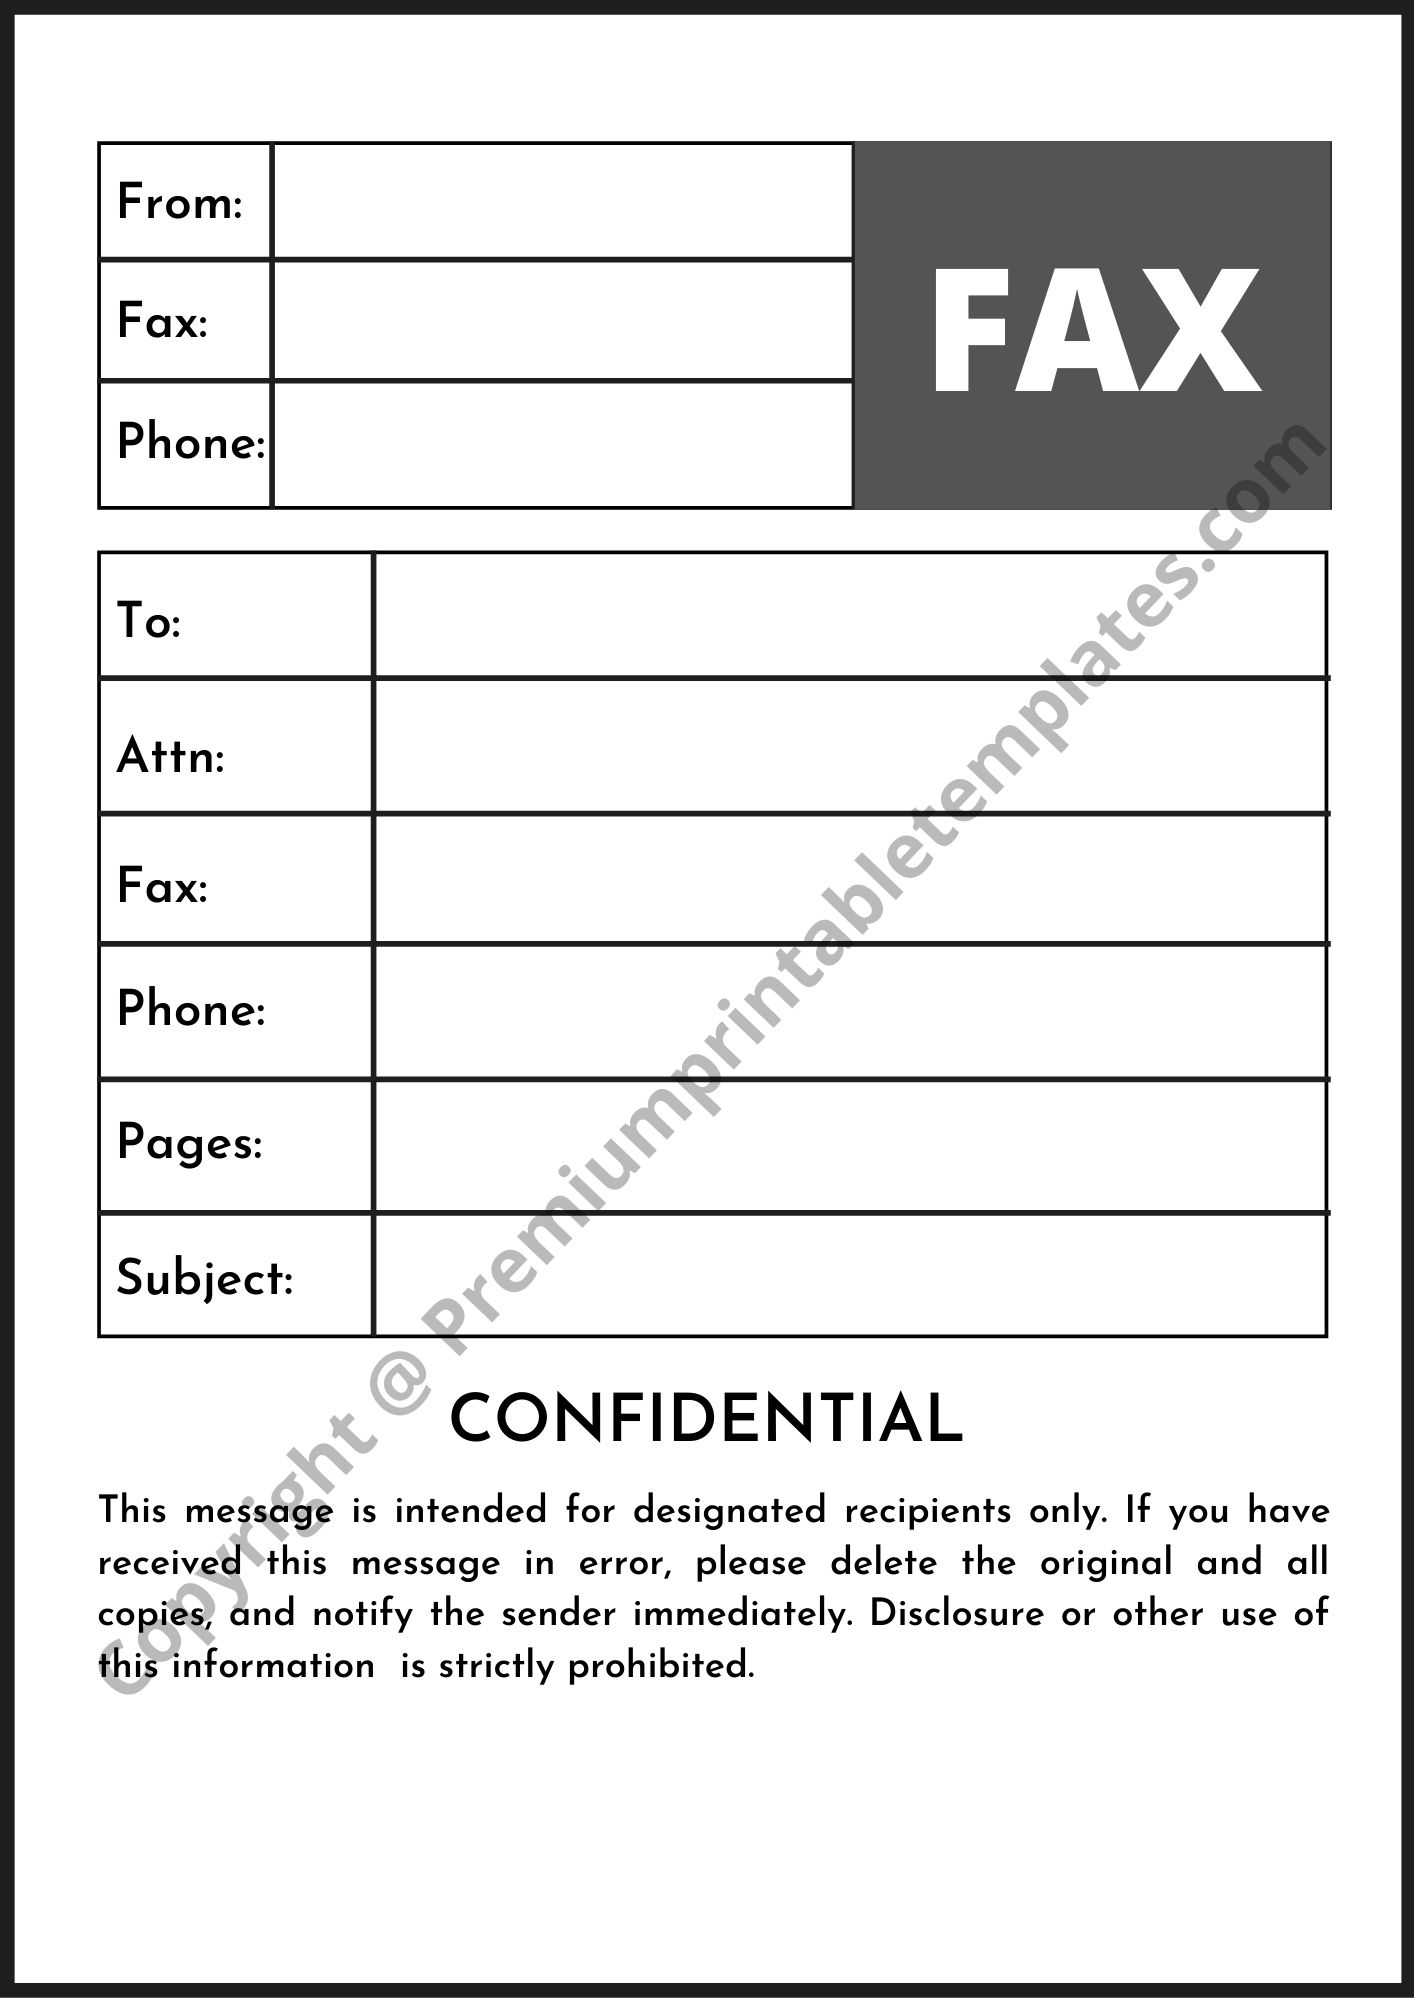 blank-fax-cover-sheet-9-free-word-pdf-documents-download